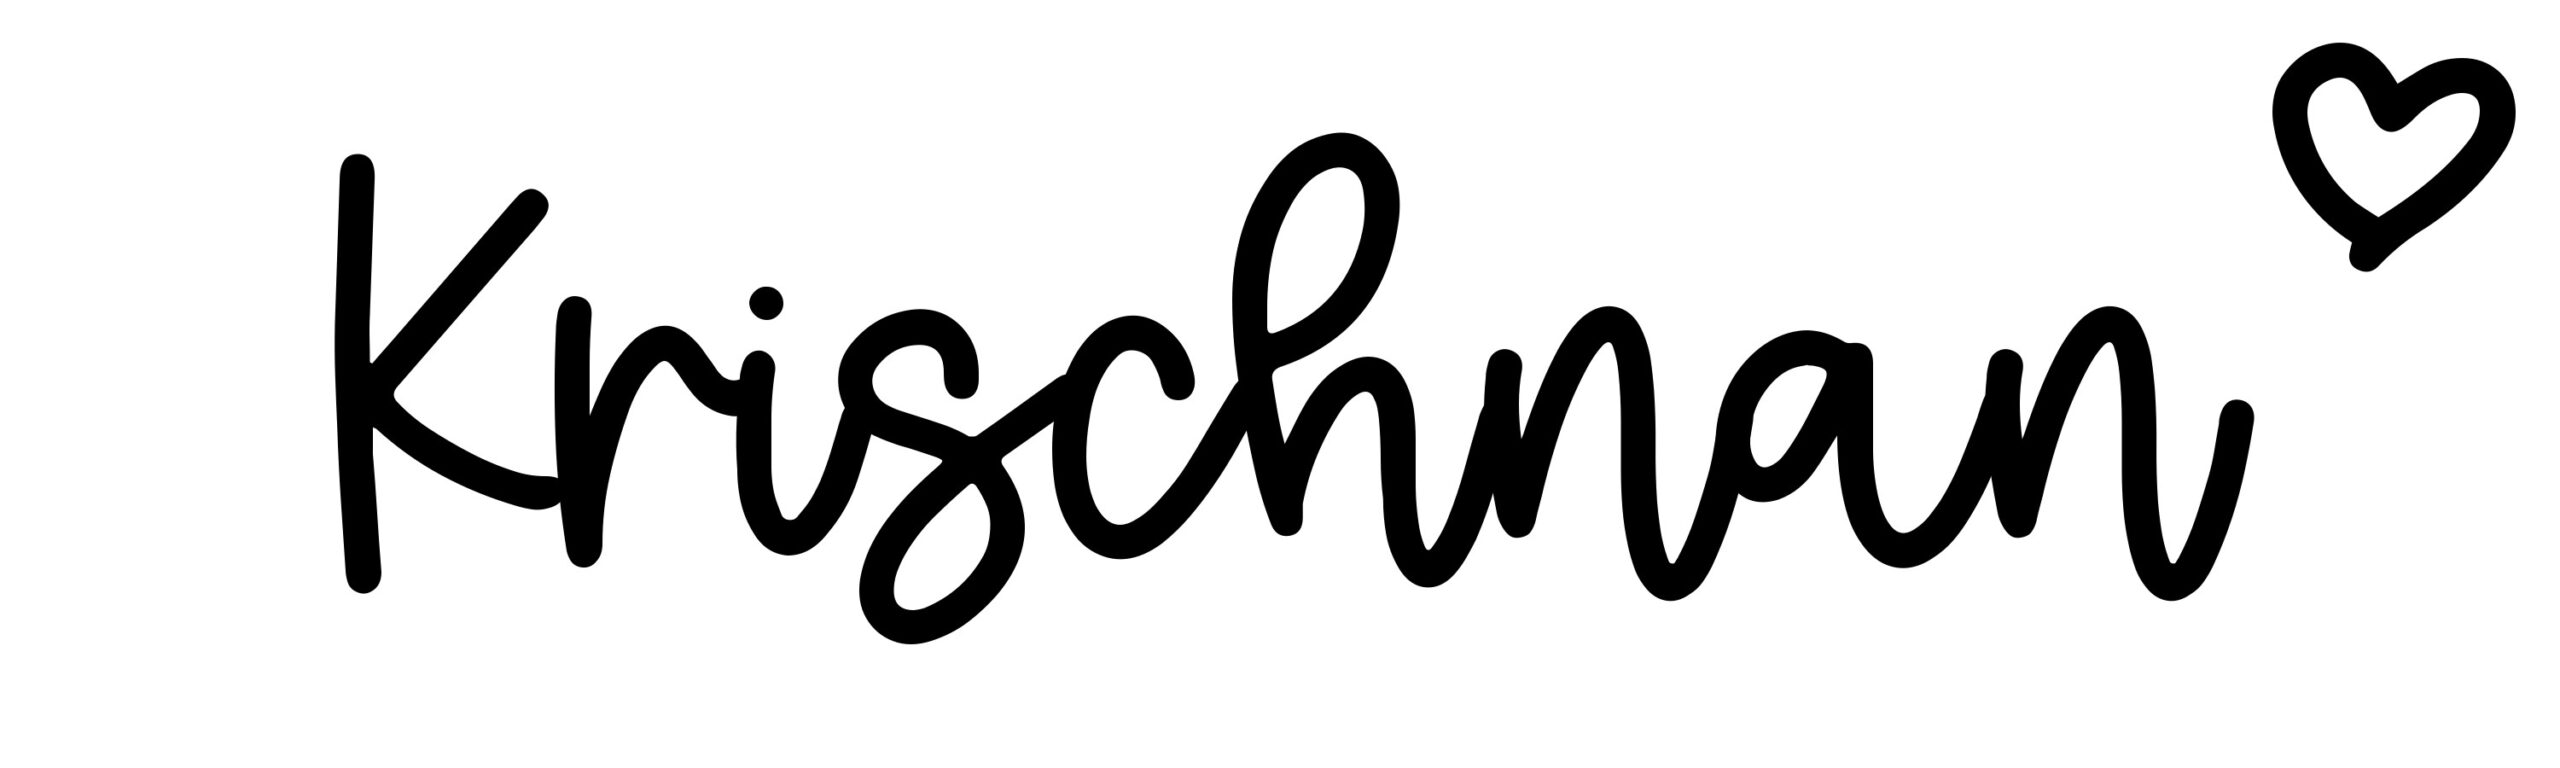 Krischnan - Name meaning, origin, variations and more